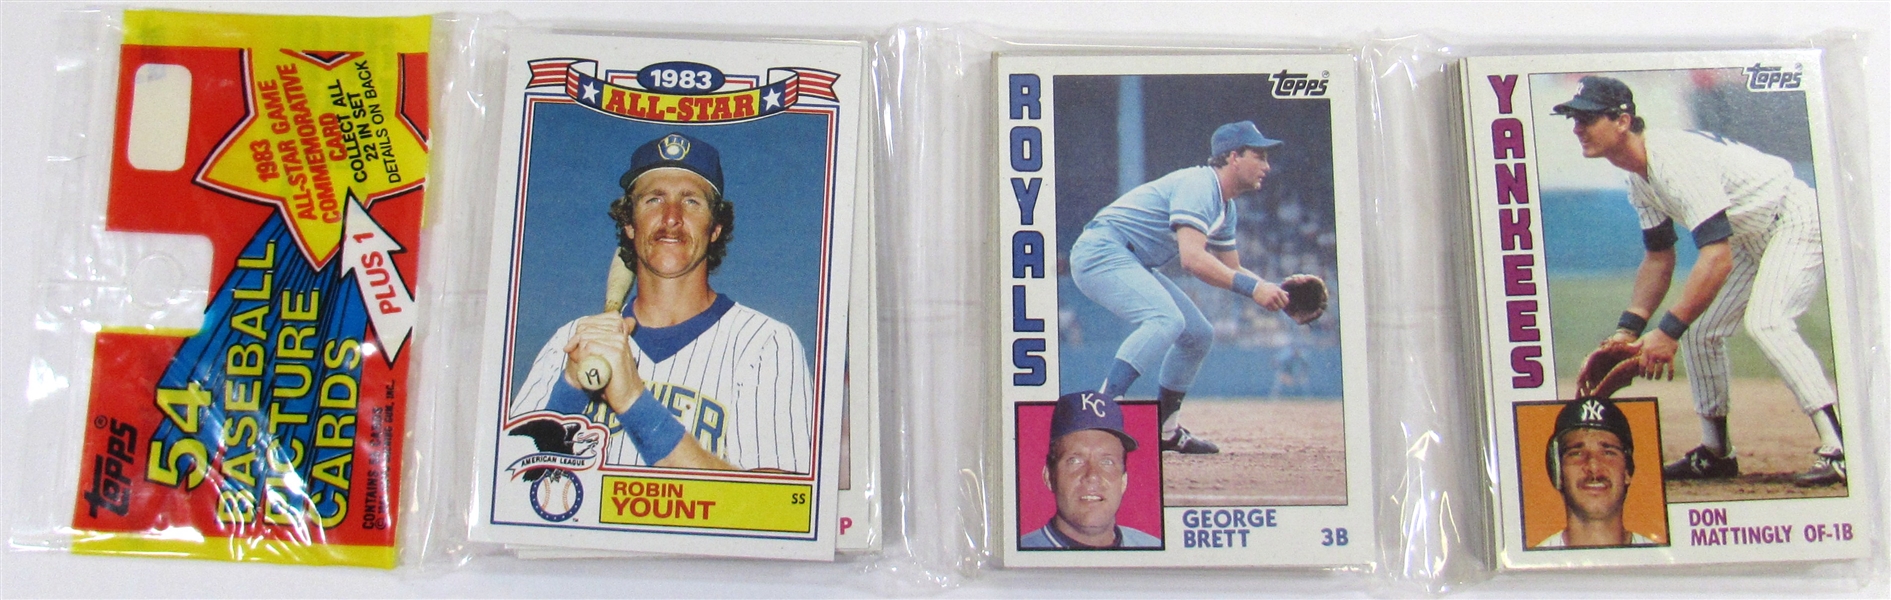 1984 Topps Rack Pack Don Mattingly Showing